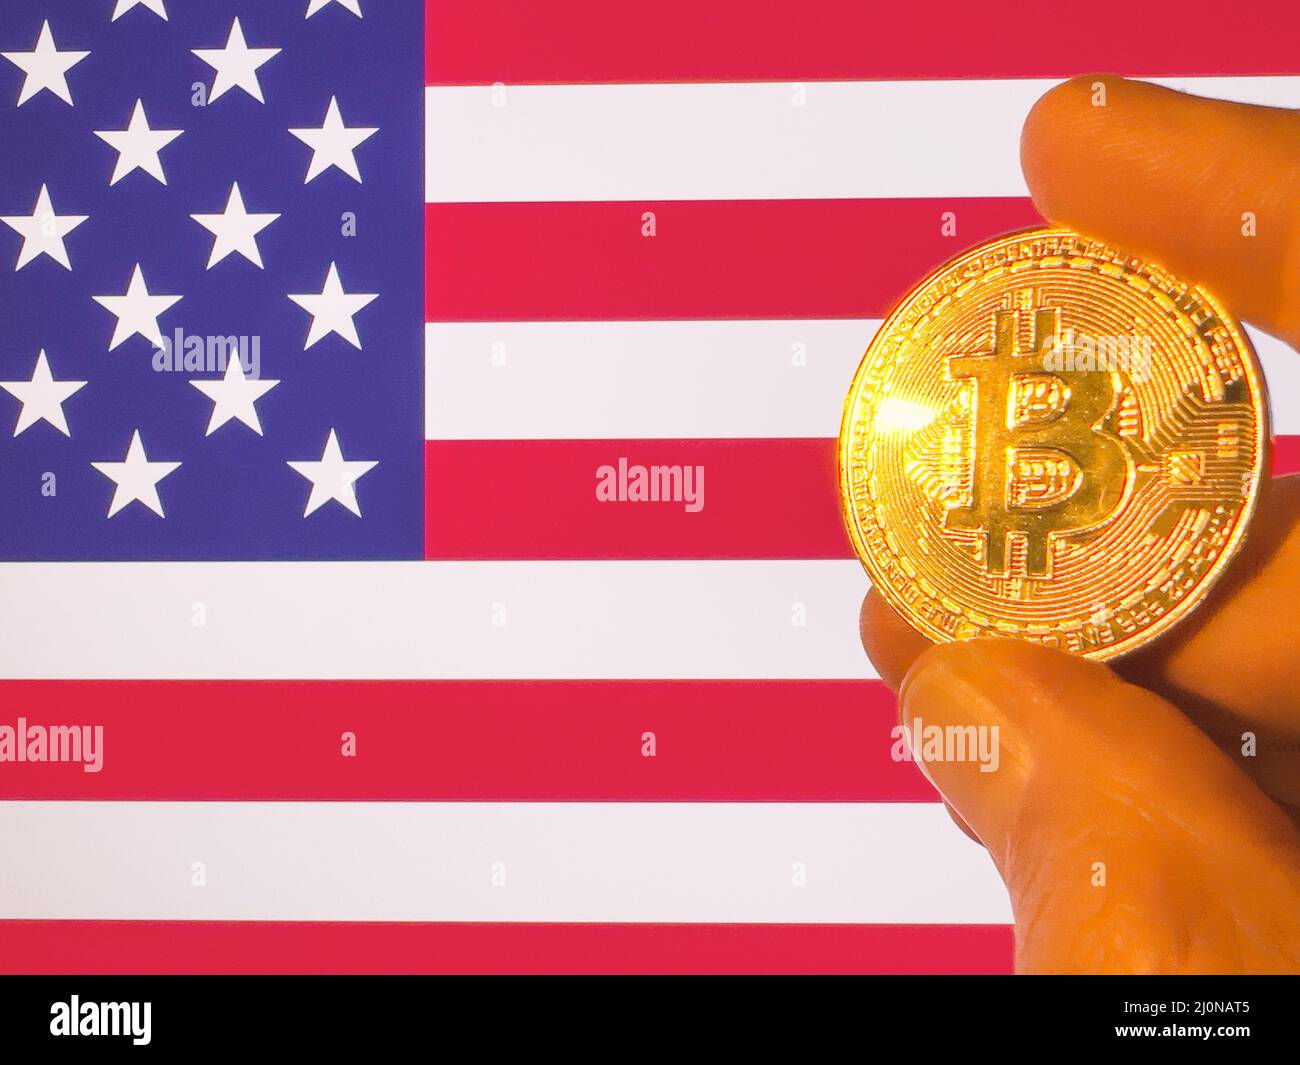 Holding a physical golden Bitcoin over the American flag. USA as cryptocurrency and blockchain technology investor. Financial background Stock Photo